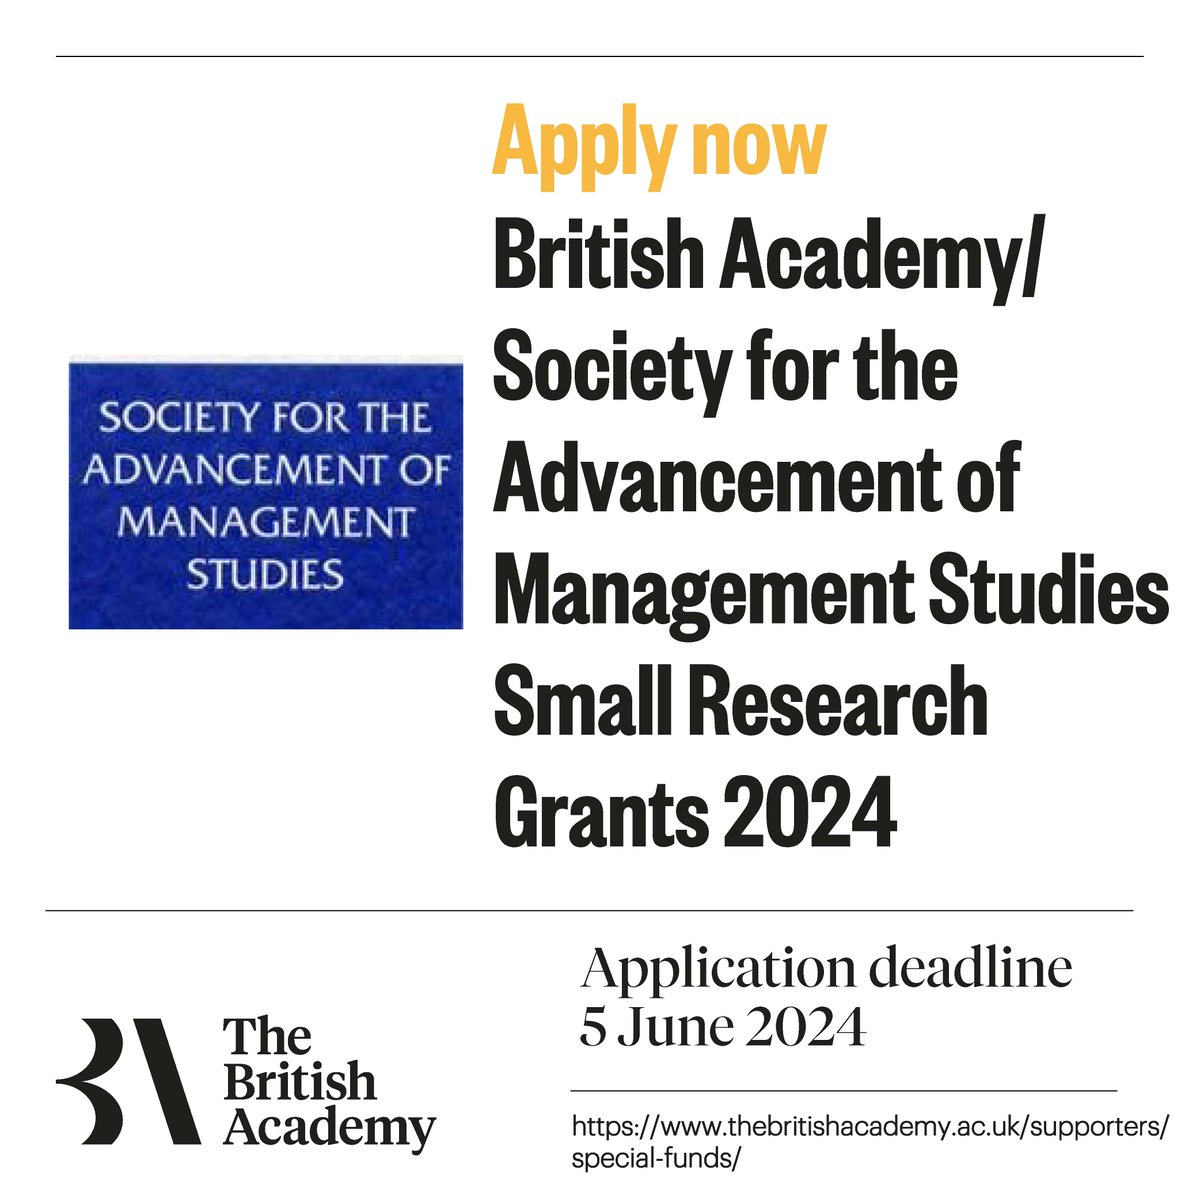 SAMS sponsors the British Academy/Leverhulme Small Research Grants Scheme; one of the highest profile awards for academics at institutions around the UK. Up to £10,000, these awards cover expenses on defined research projects. Full details: bit.ly/3wOOjU0